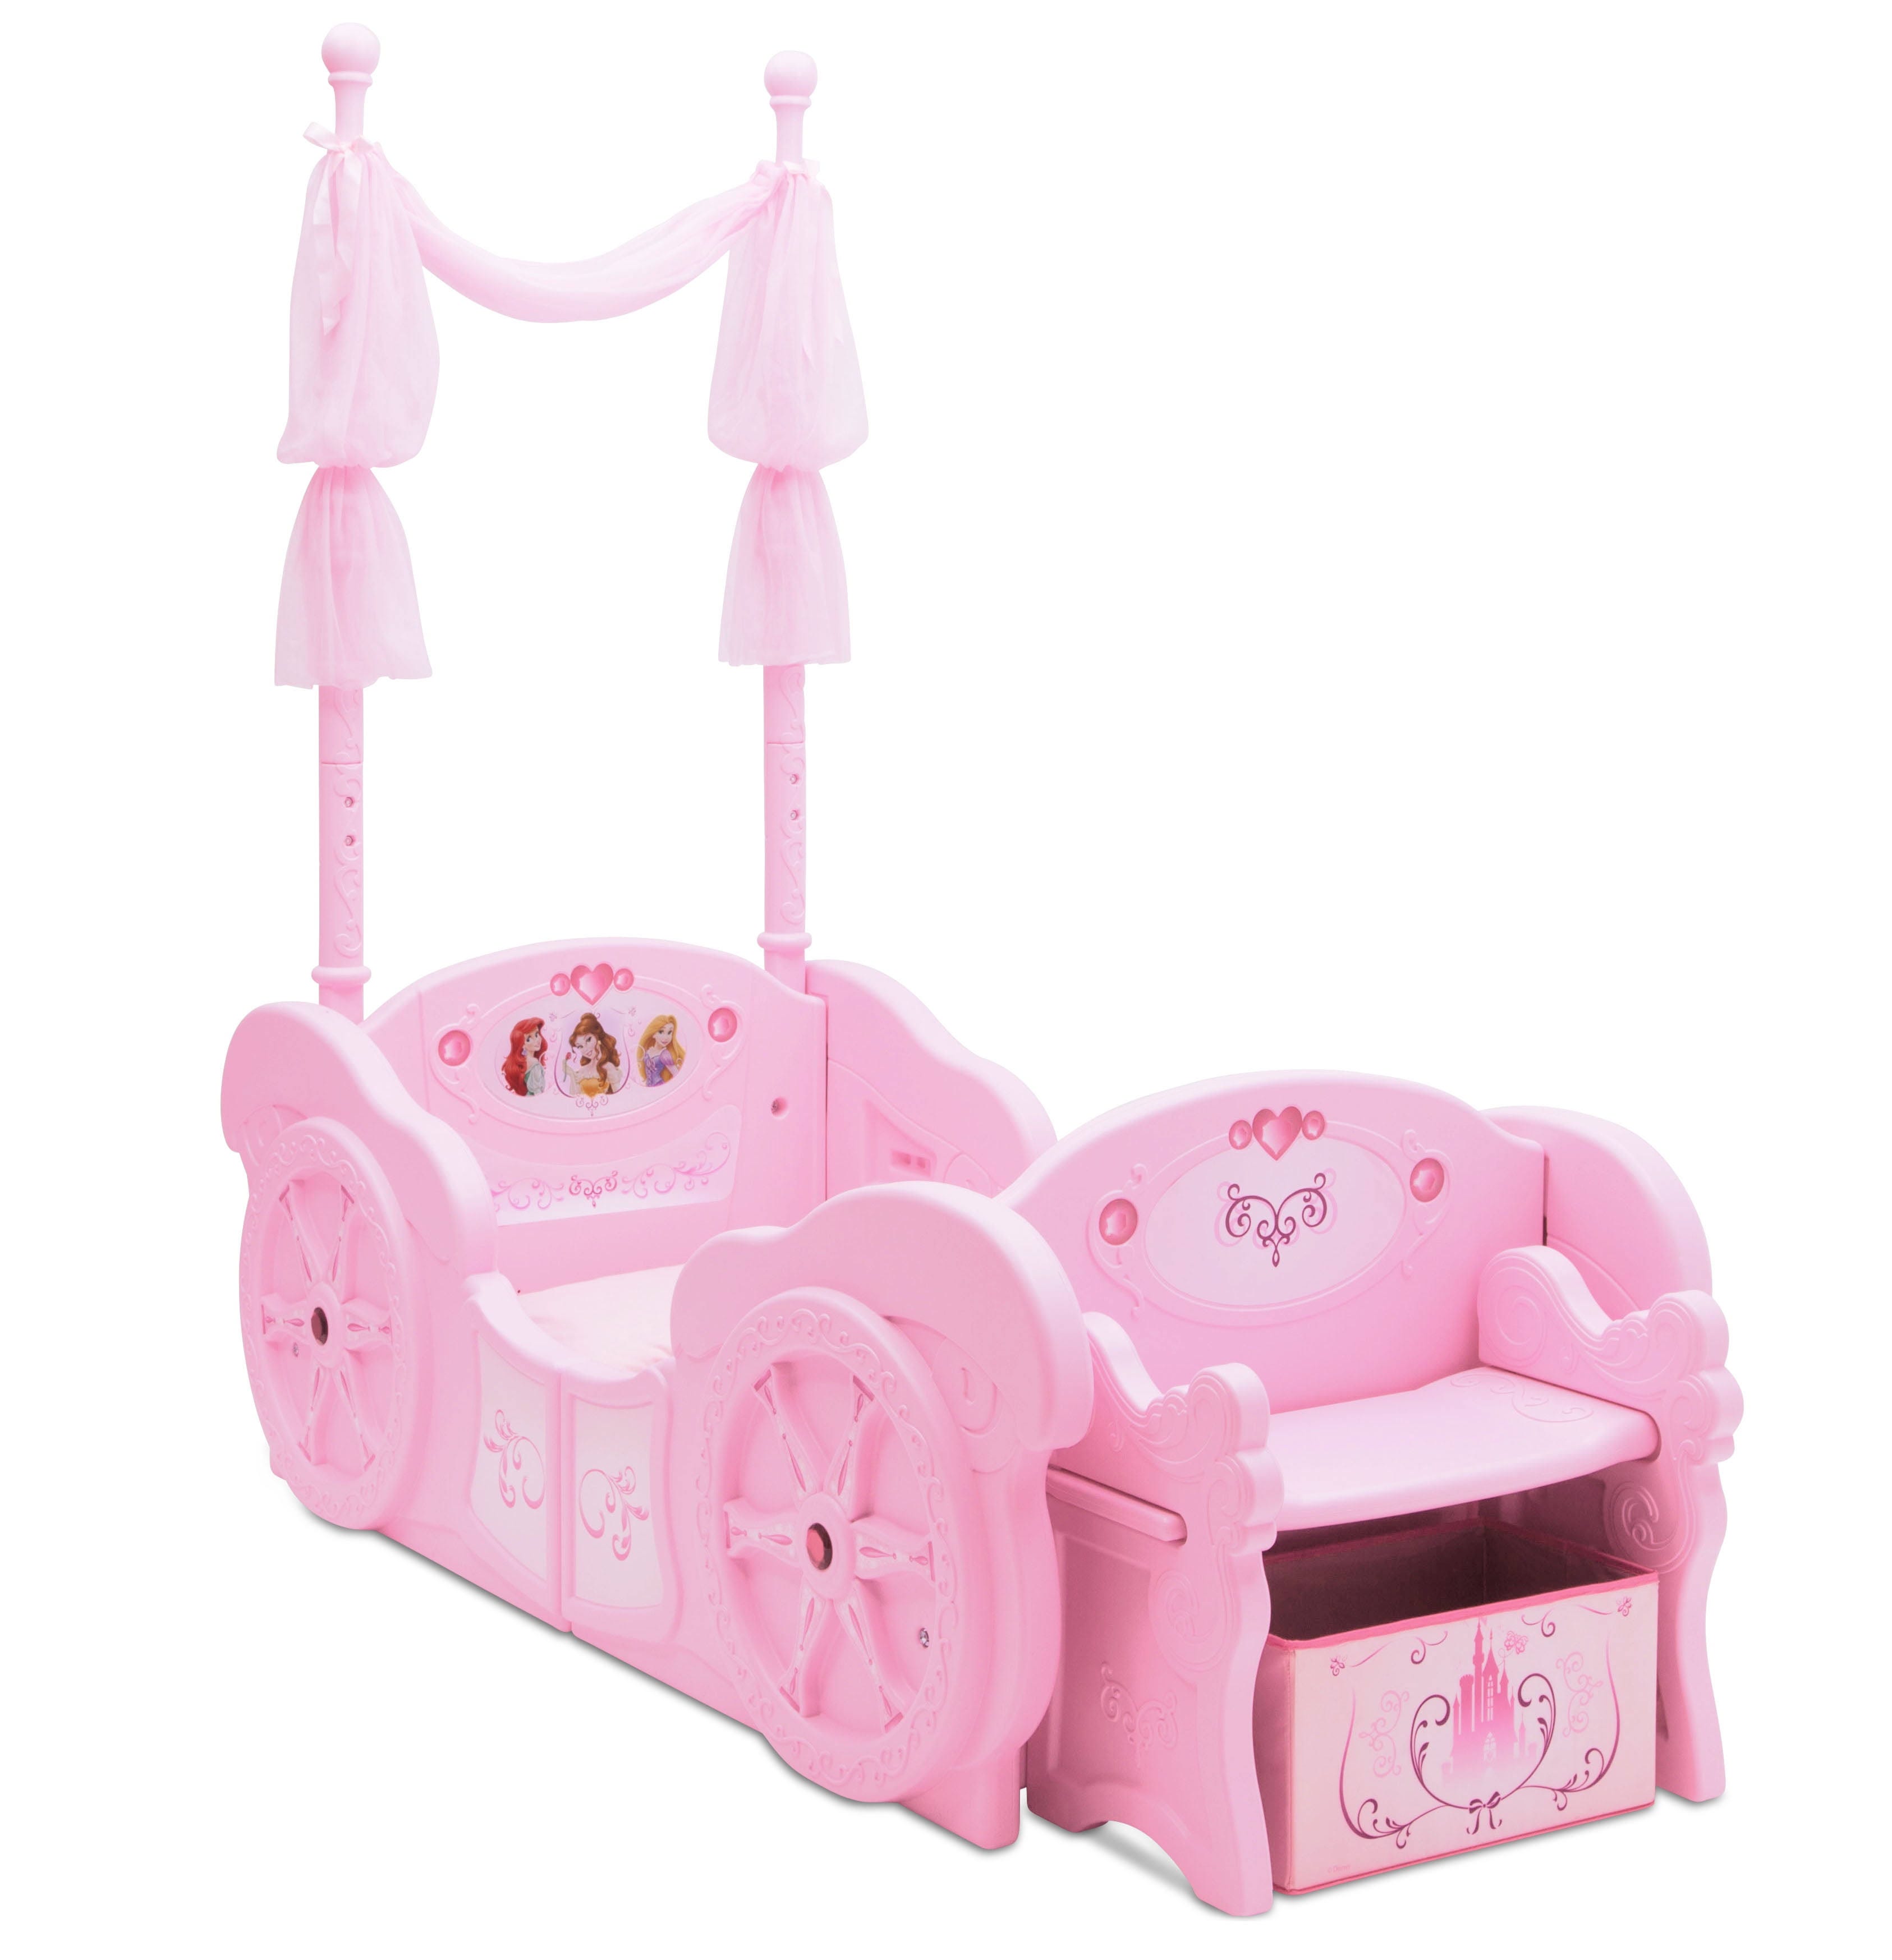 Disney Princess Carriage Toddler-to-Twin Bed | Image